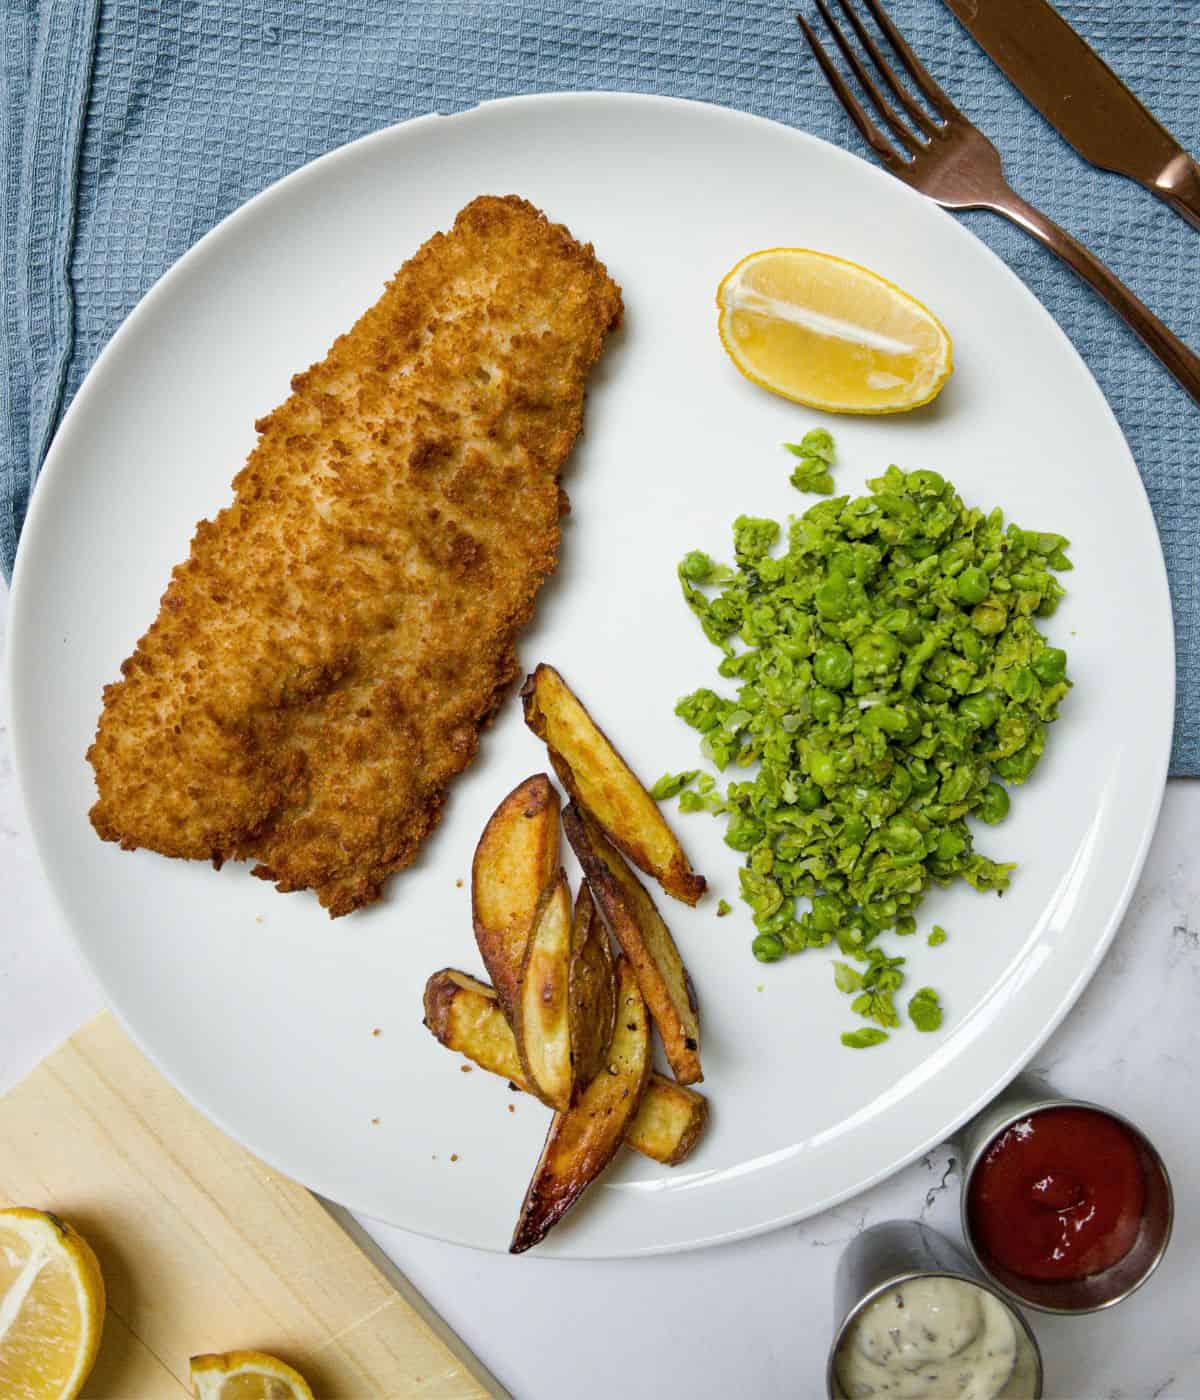 Fish, chips, mushy peas and lemon on a plate.